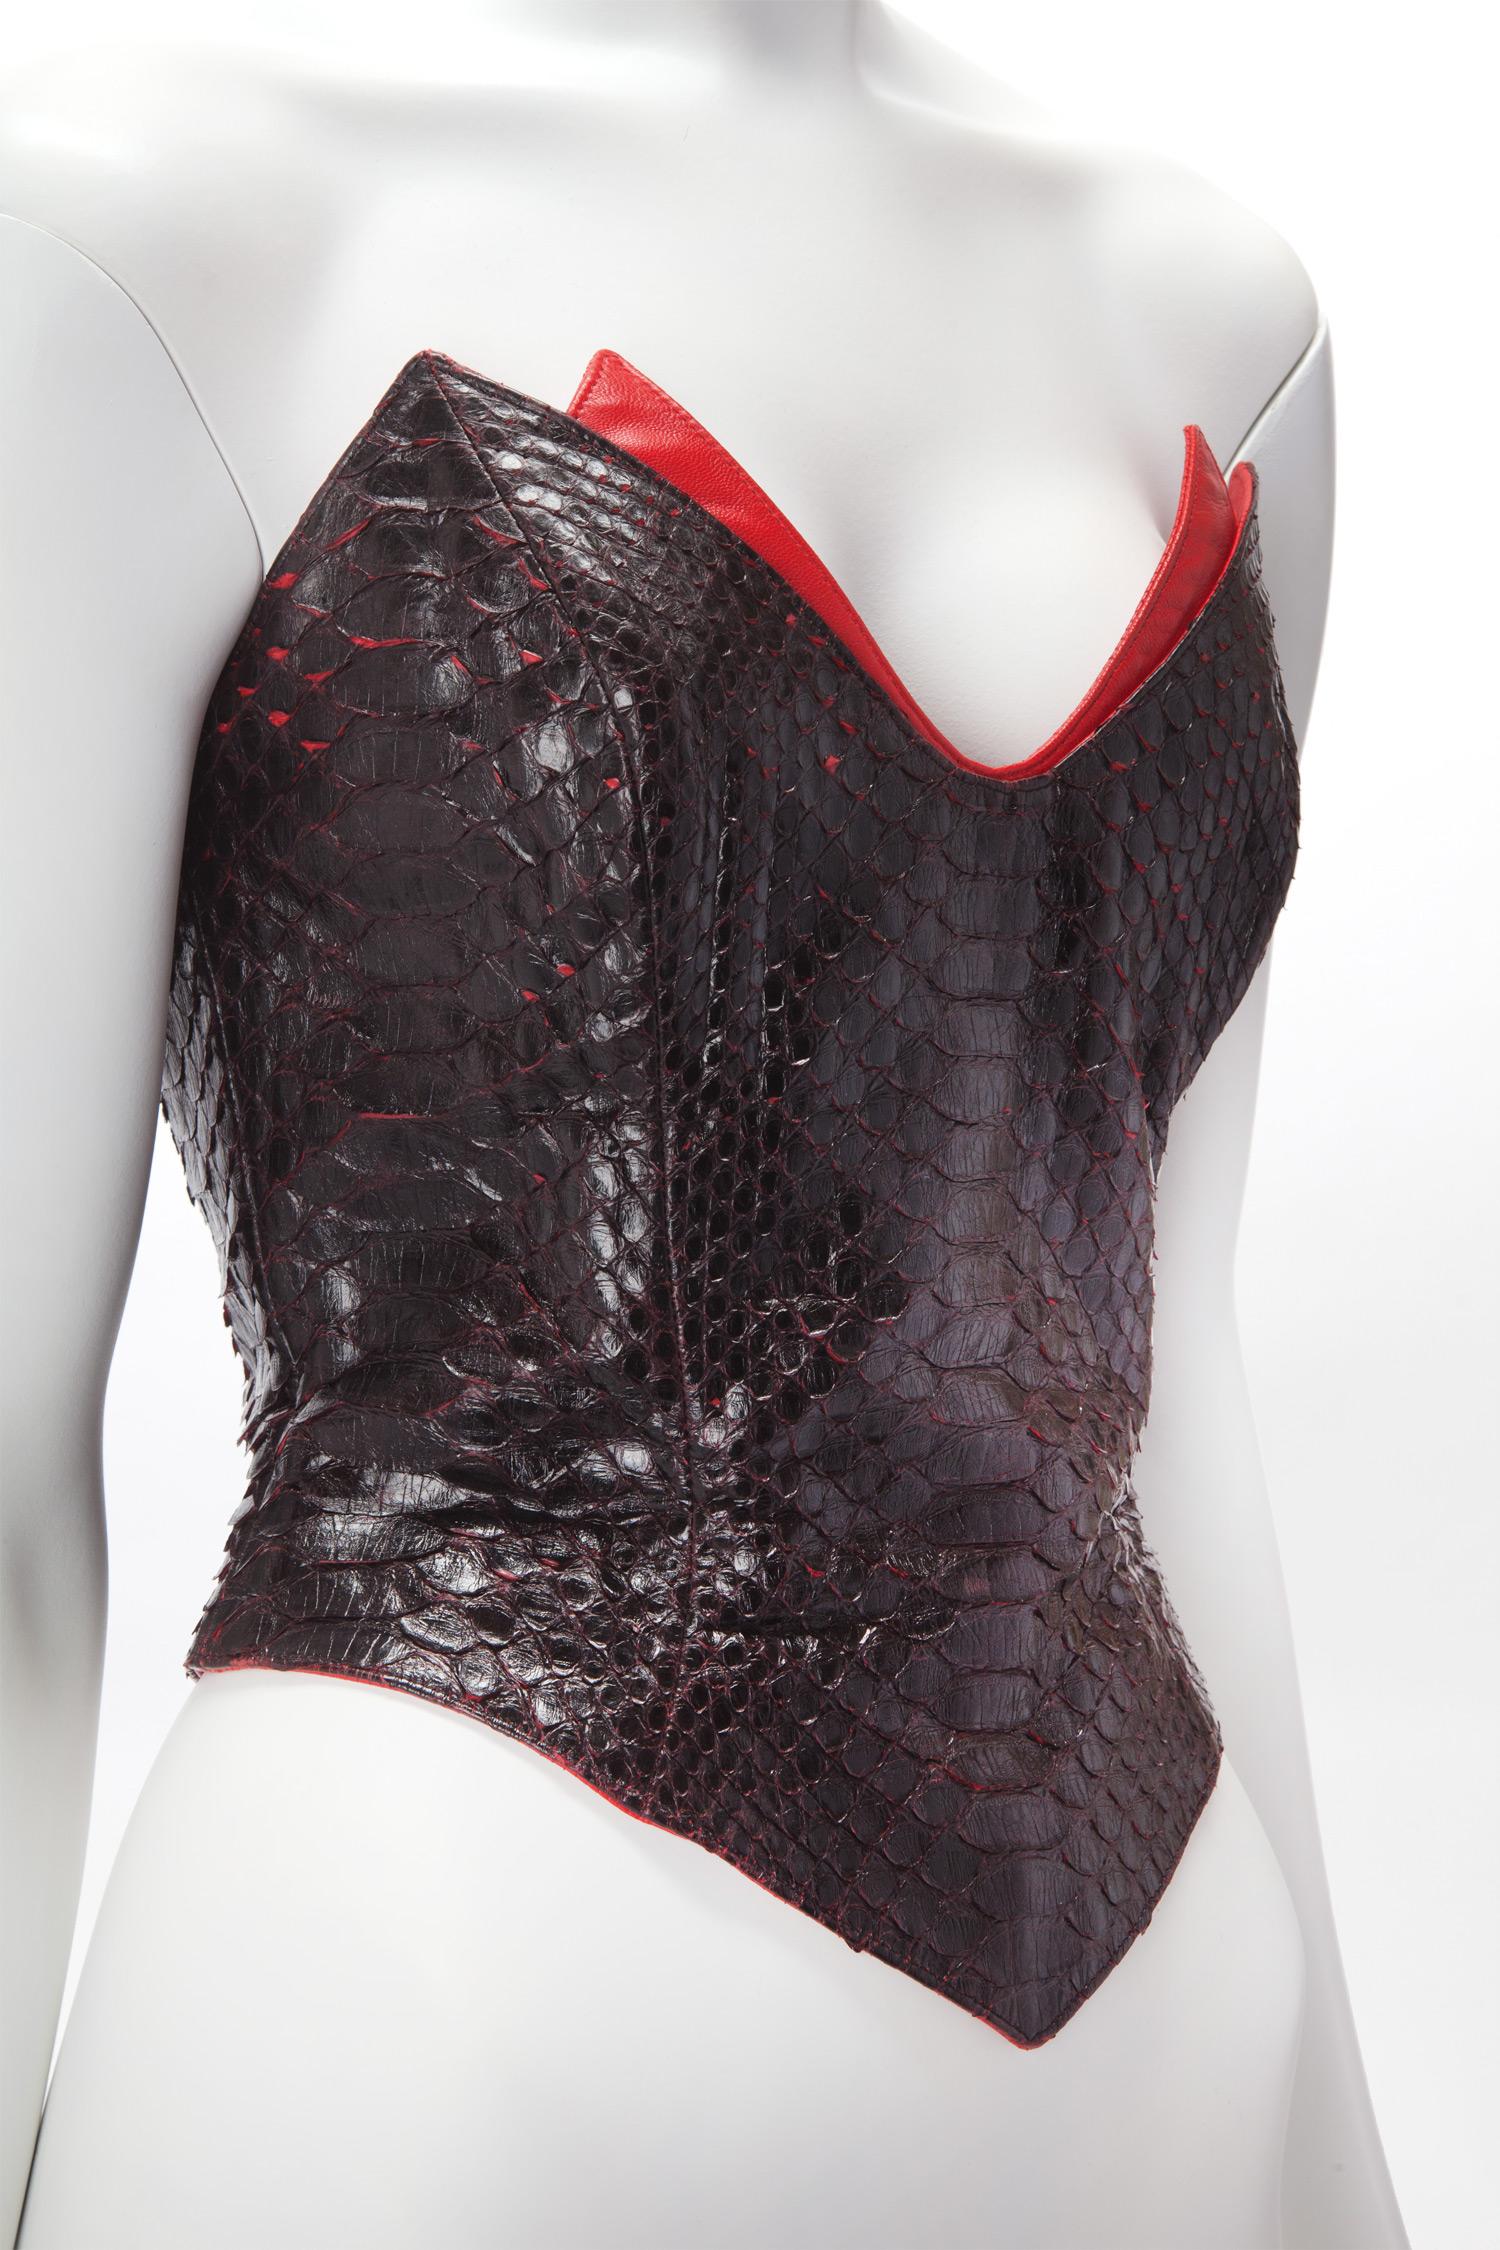 c. 1990's Thierry Mugler Couture Black Python Corset with Red Leather Inset Panel; Boned Bodice with Red Satin Lining;  Python is Supple. US size 4